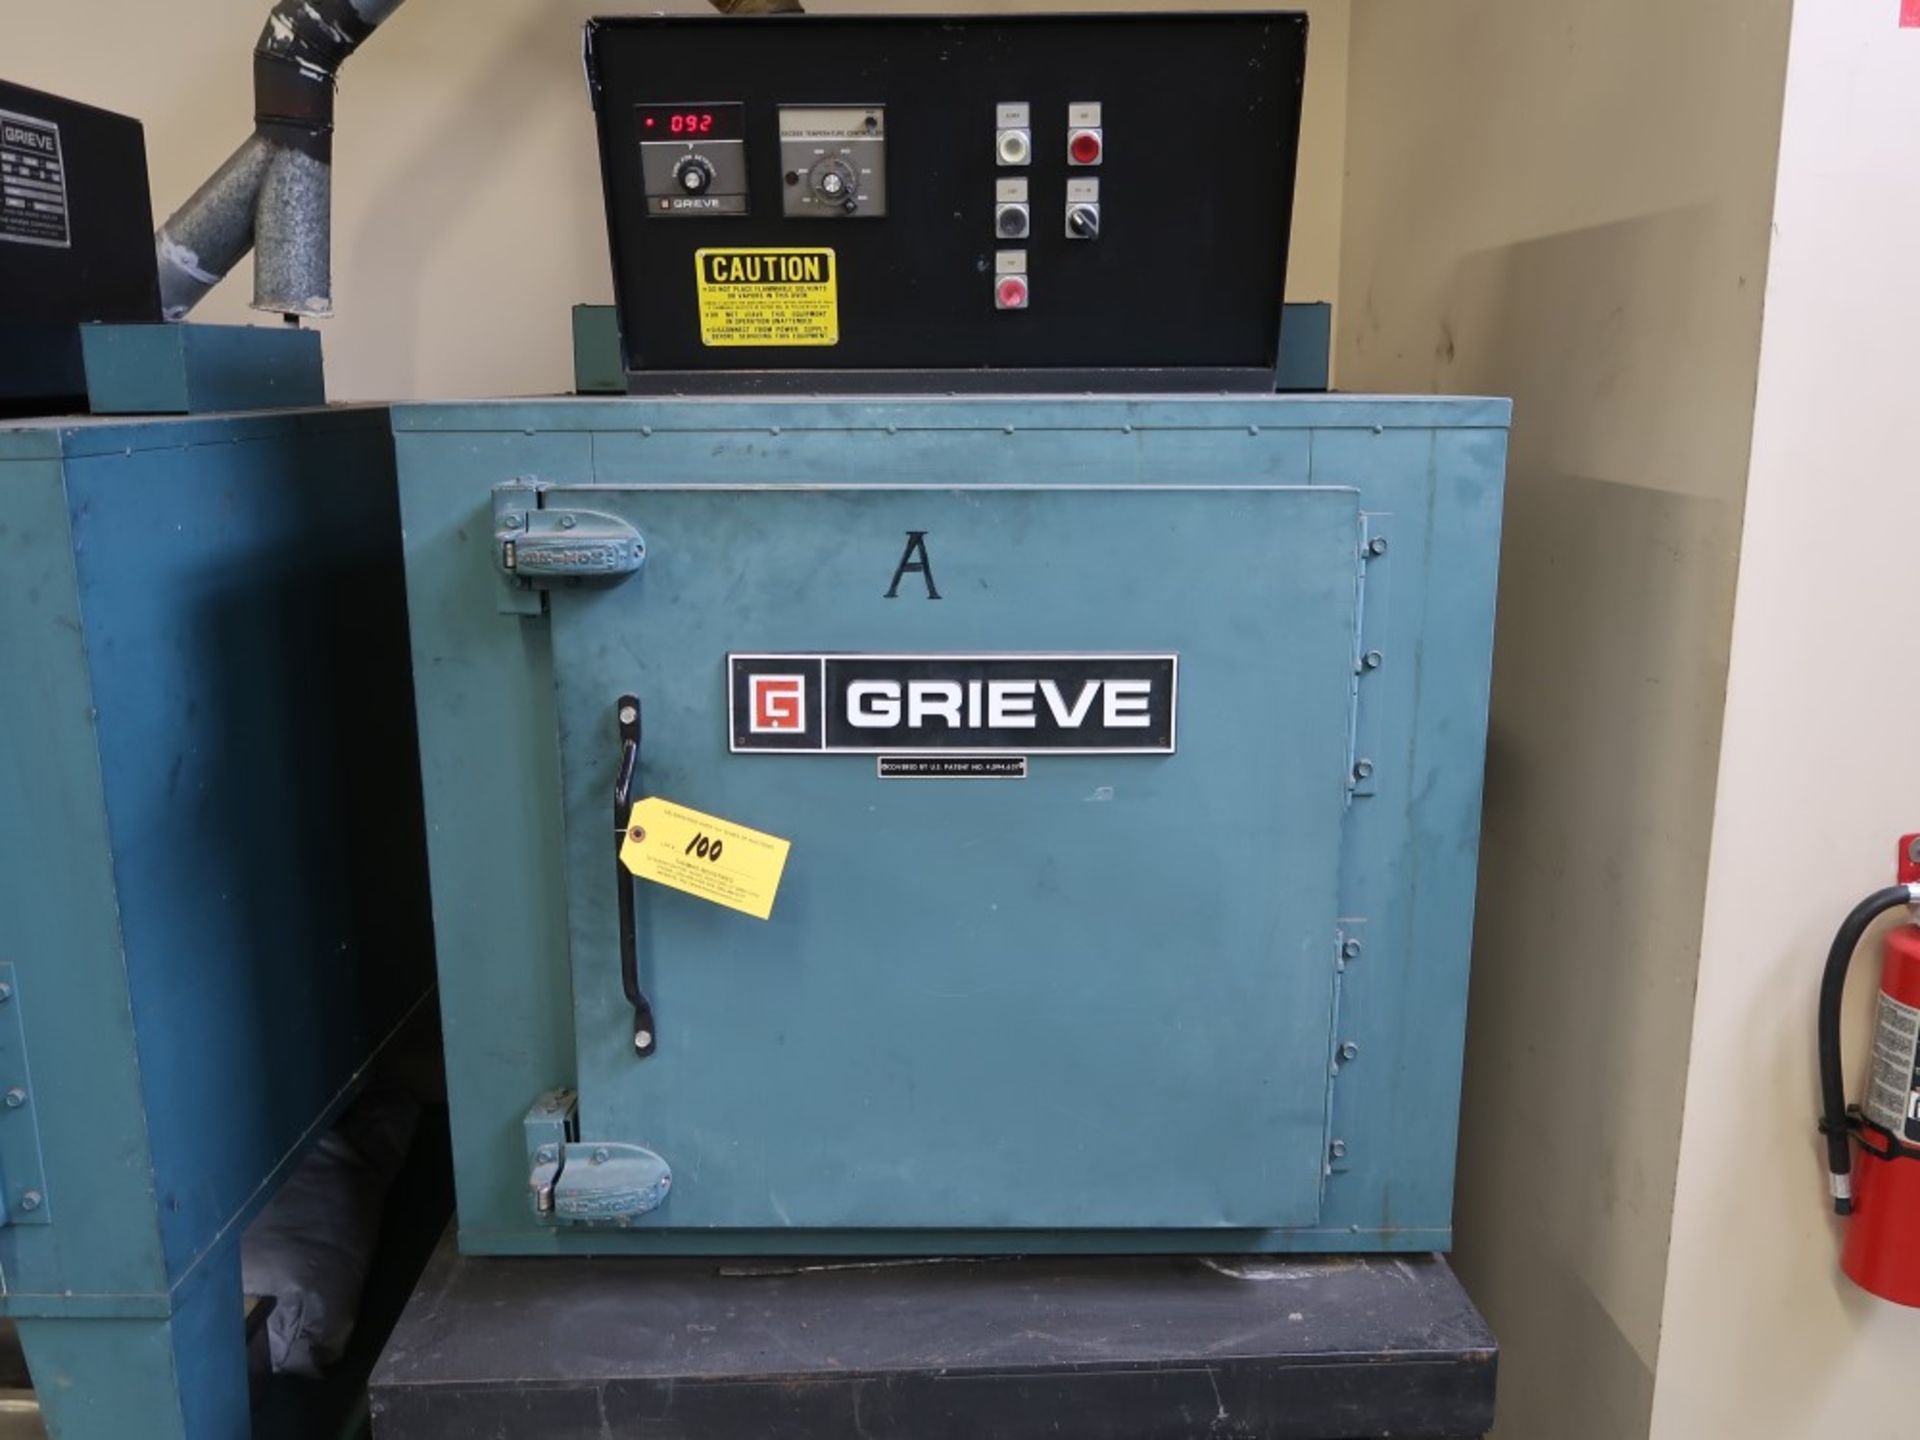 Grieve Electric Oven Model AF-500 S/N 370134 Max Temp 500 Degrees F - Image 2 of 5